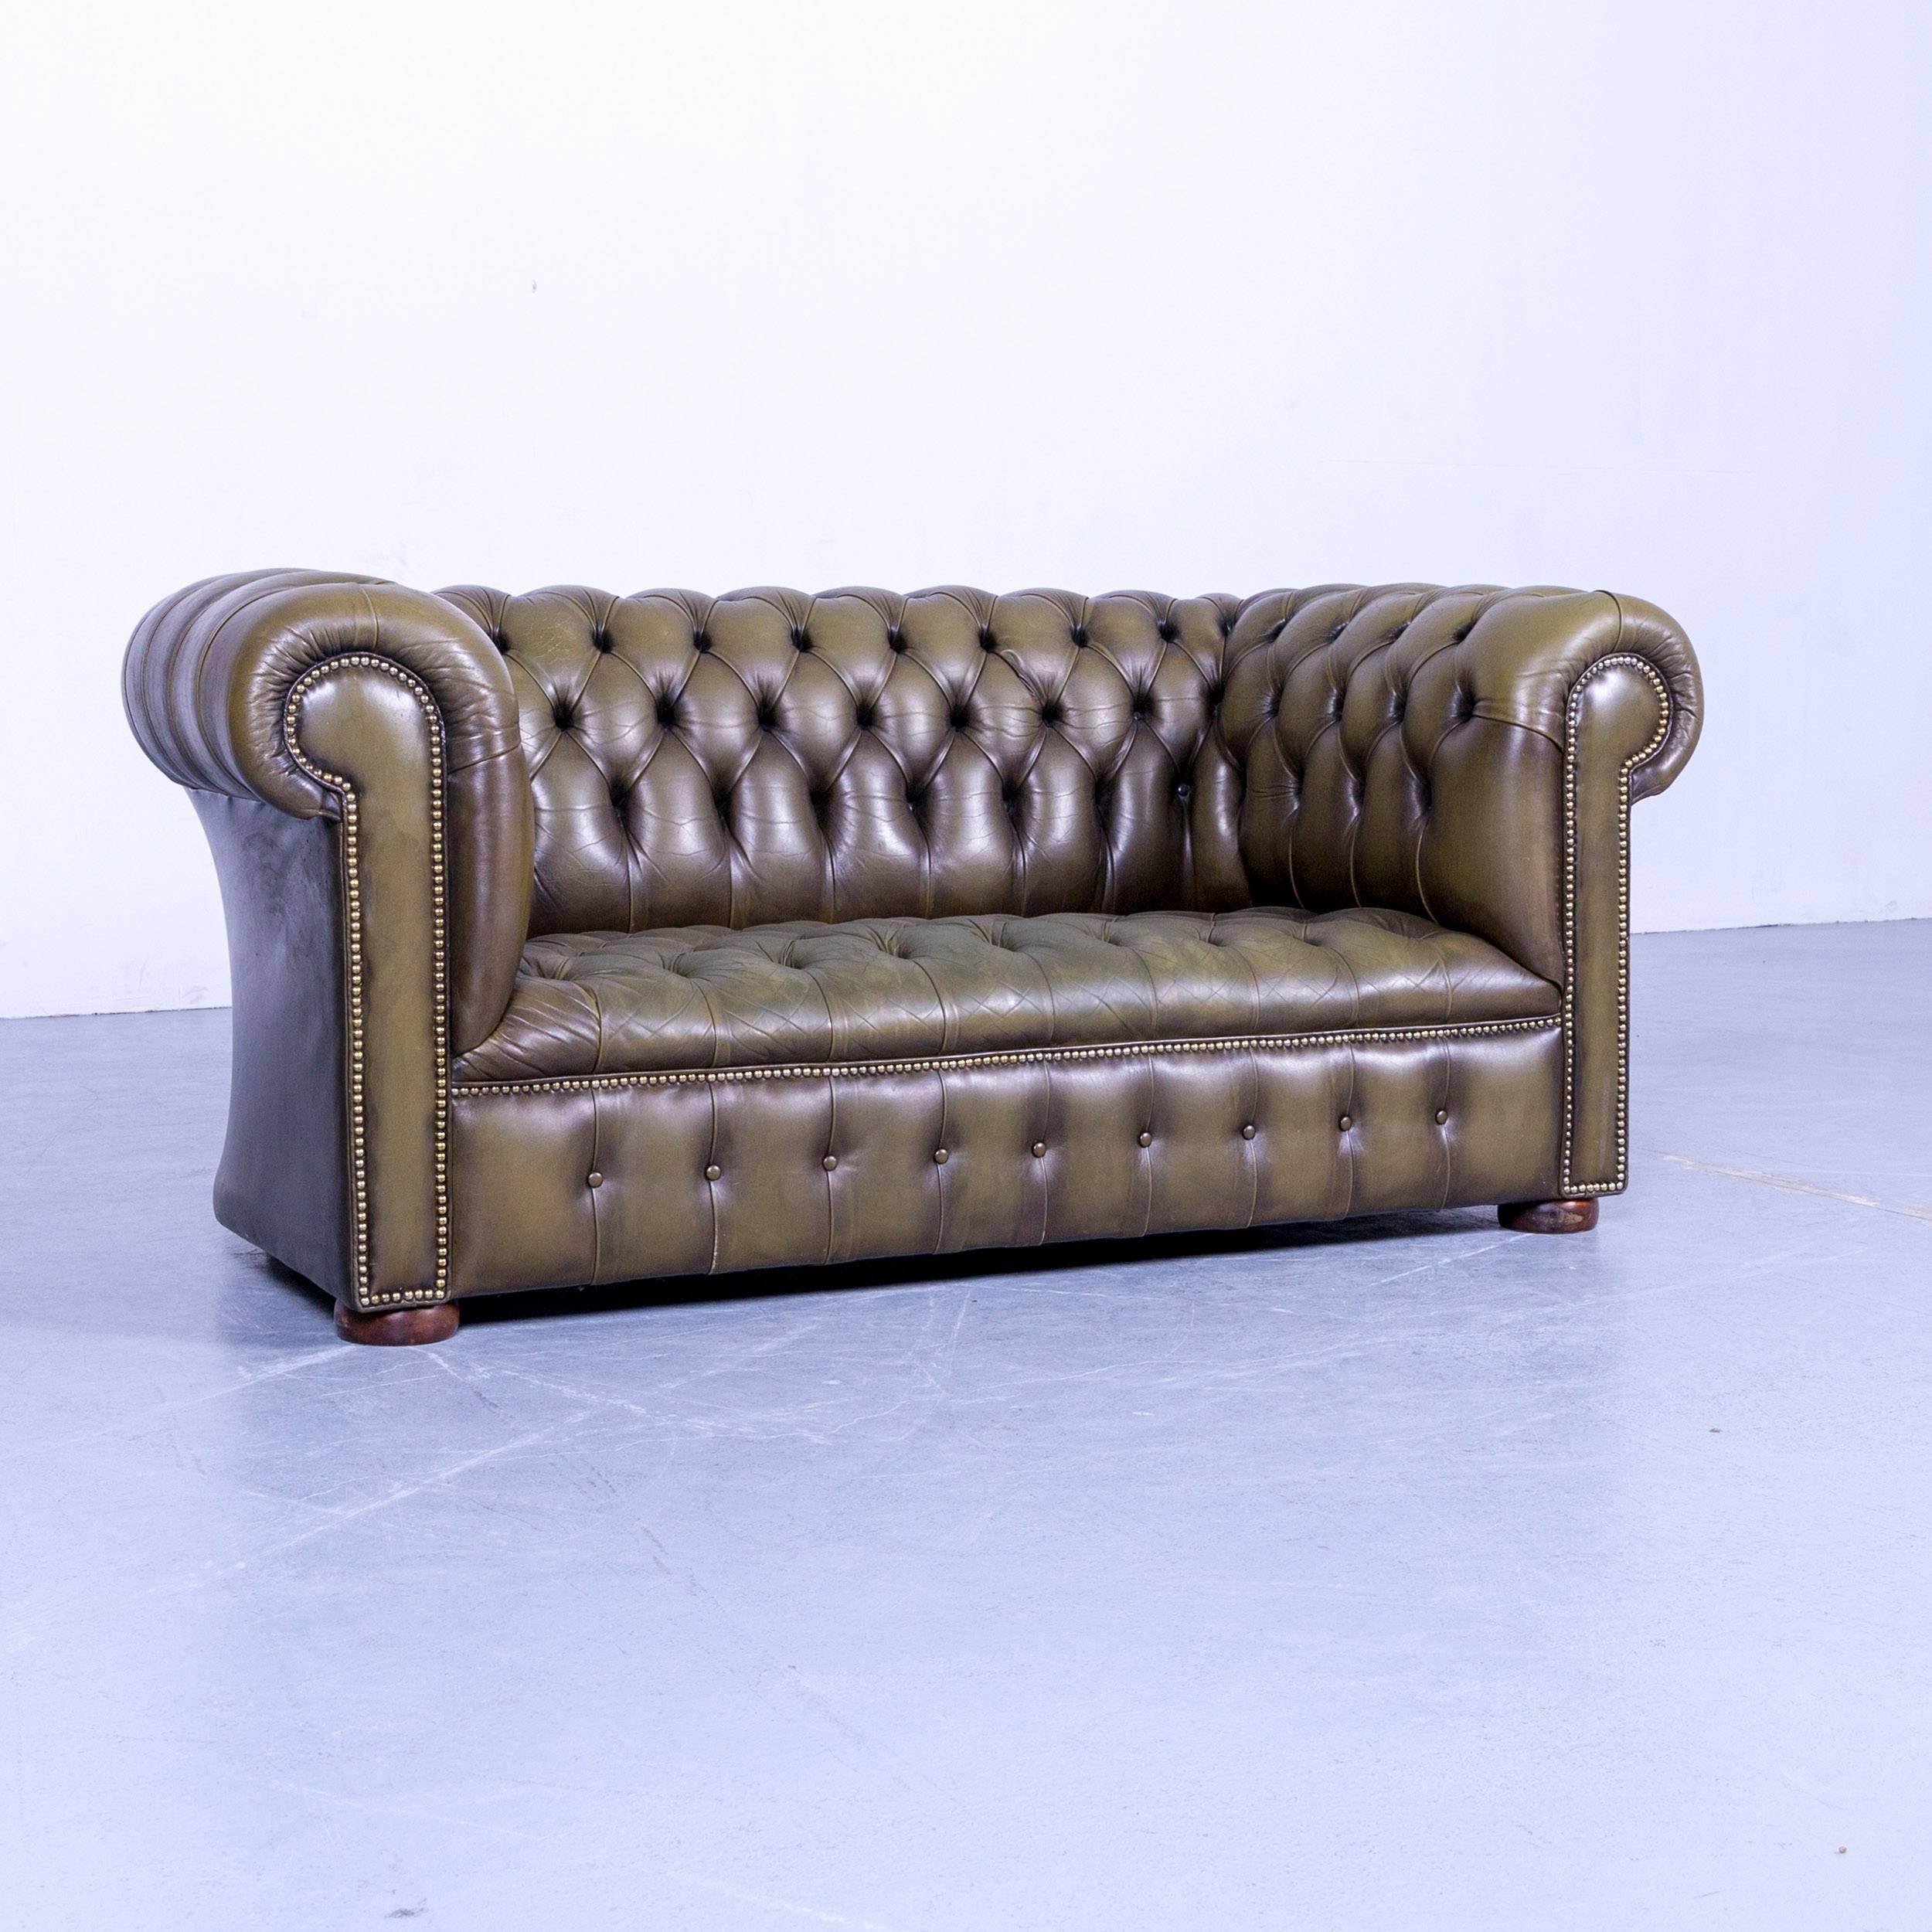 An Chesterfield leather sofa olive green couch vintage two-seat.




















 